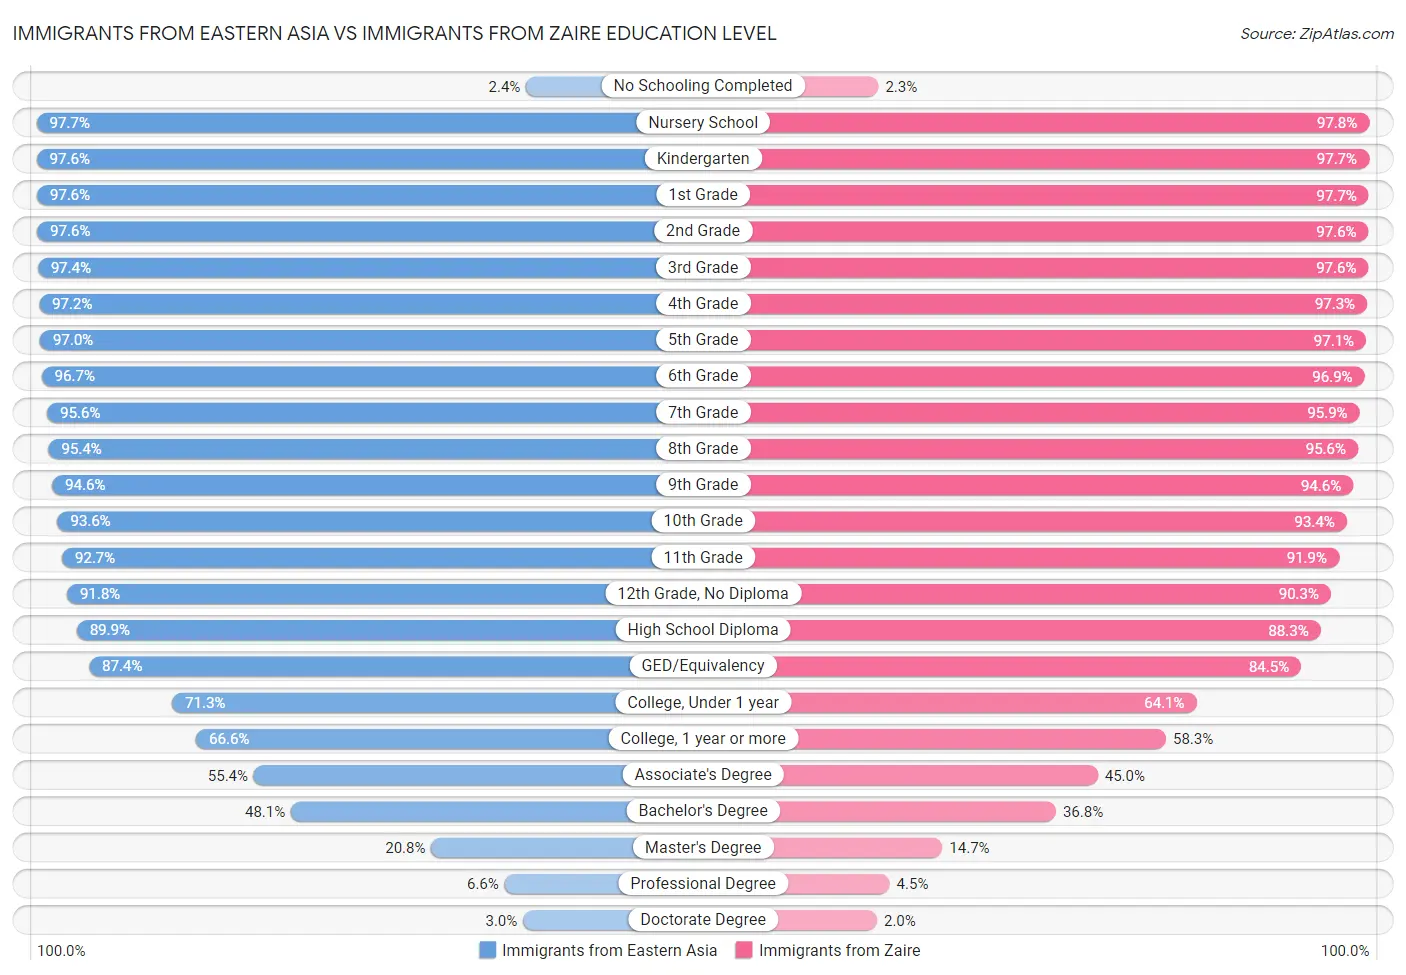 Immigrants from Eastern Asia vs Immigrants from Zaire Education Level